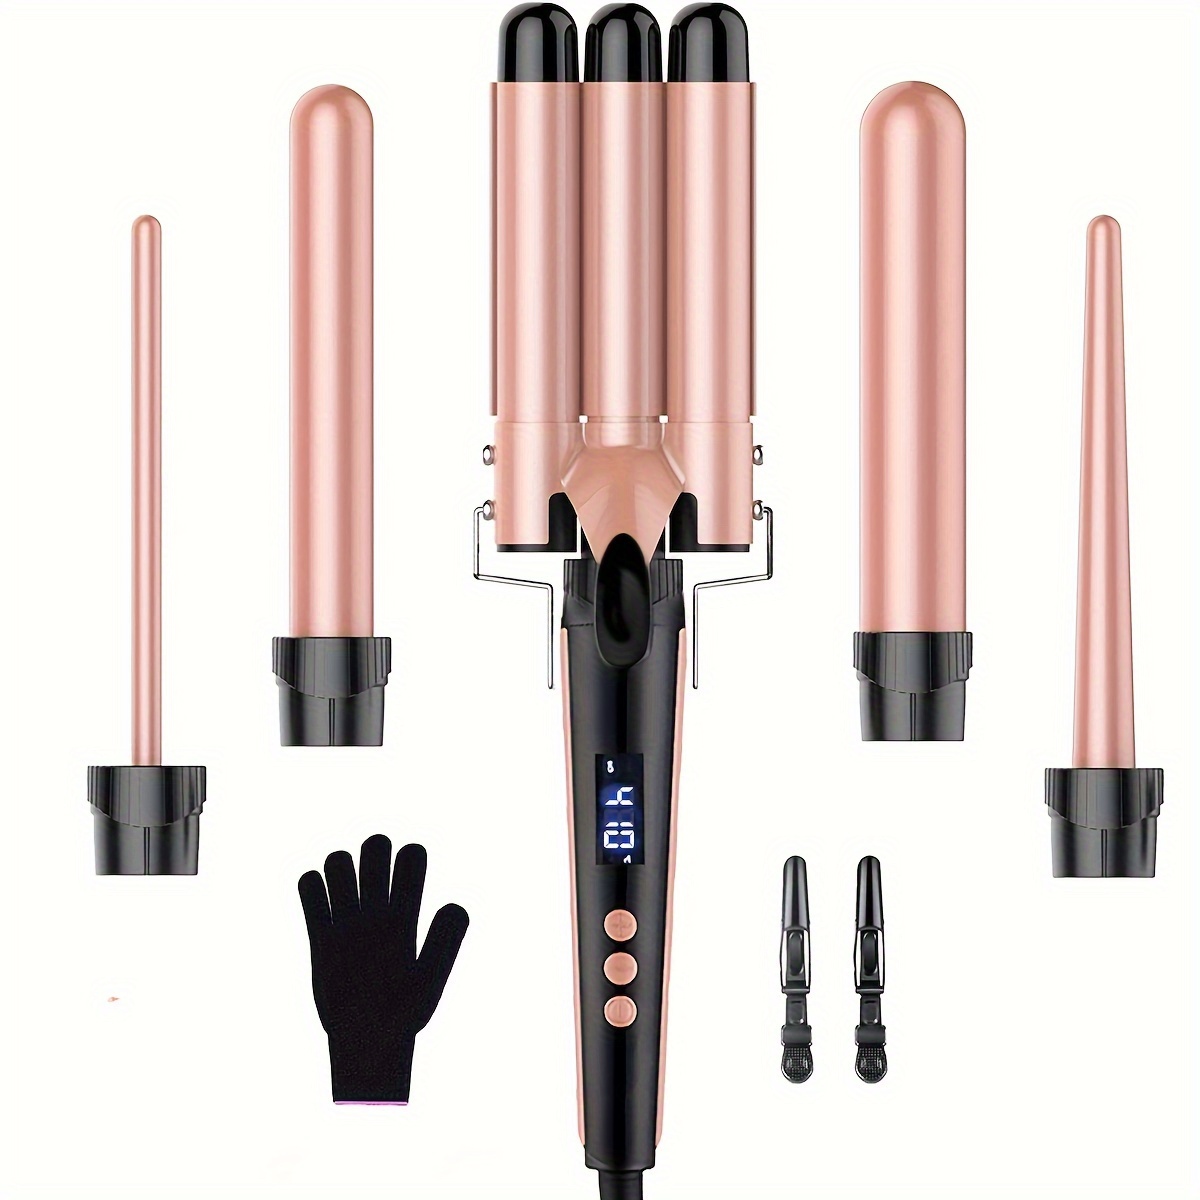 

Waver Curling Iron Wand, 5 In 1 Curling Wand Set With 3 Barrel Hair Crimper For Women, With Led Display, Fast Heating Hair Wand Curler In All Hair Type Adjustable Comfort